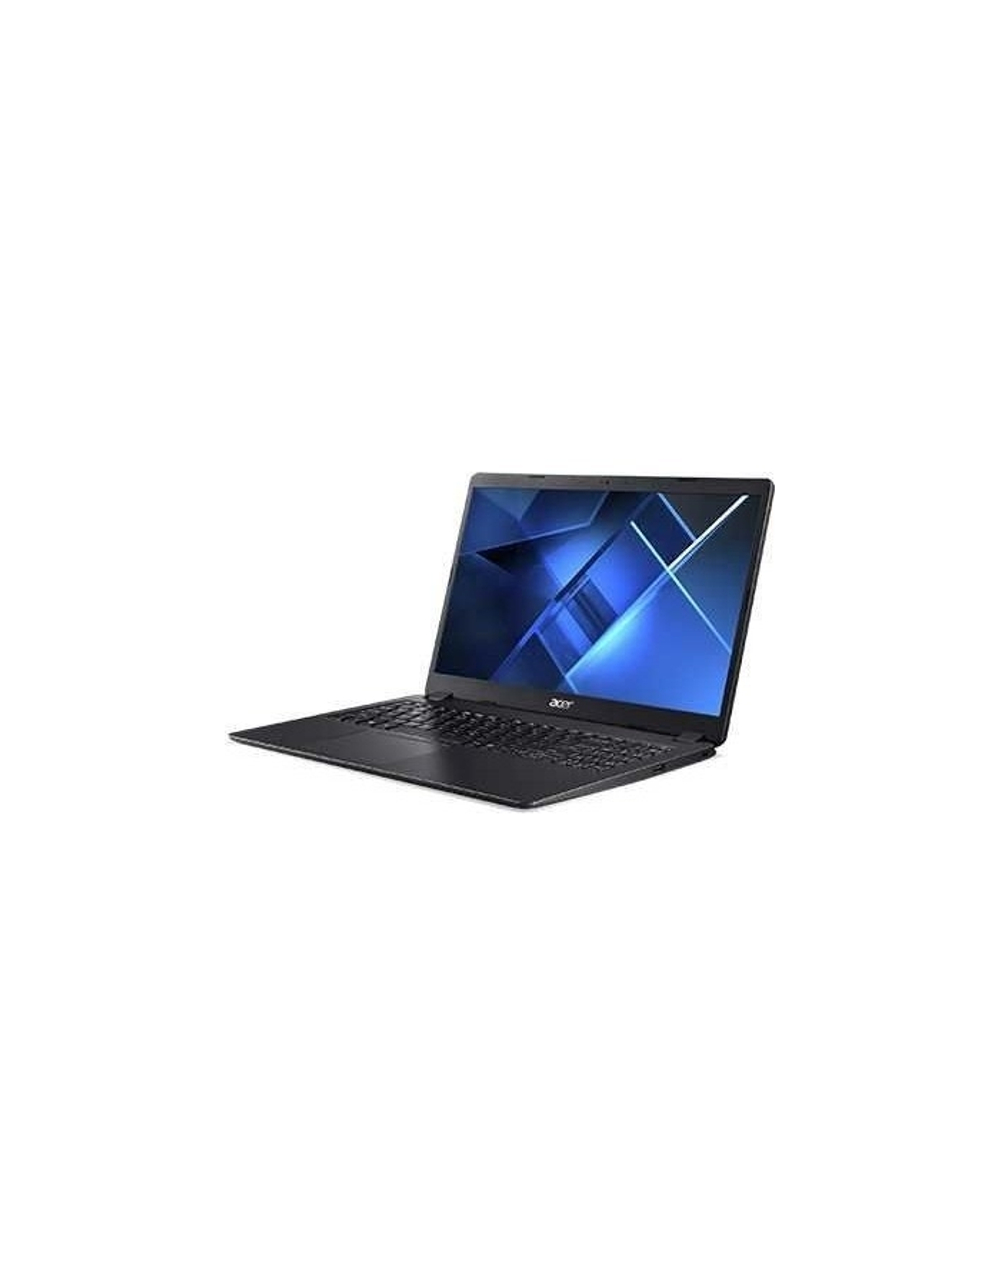 Acer Extensa 15 EX215-52-53U4 [NX.EG8ER.00B] Black 15.6" (FHD i5-1035G1/8Gb/512Gb SSD/DOS)